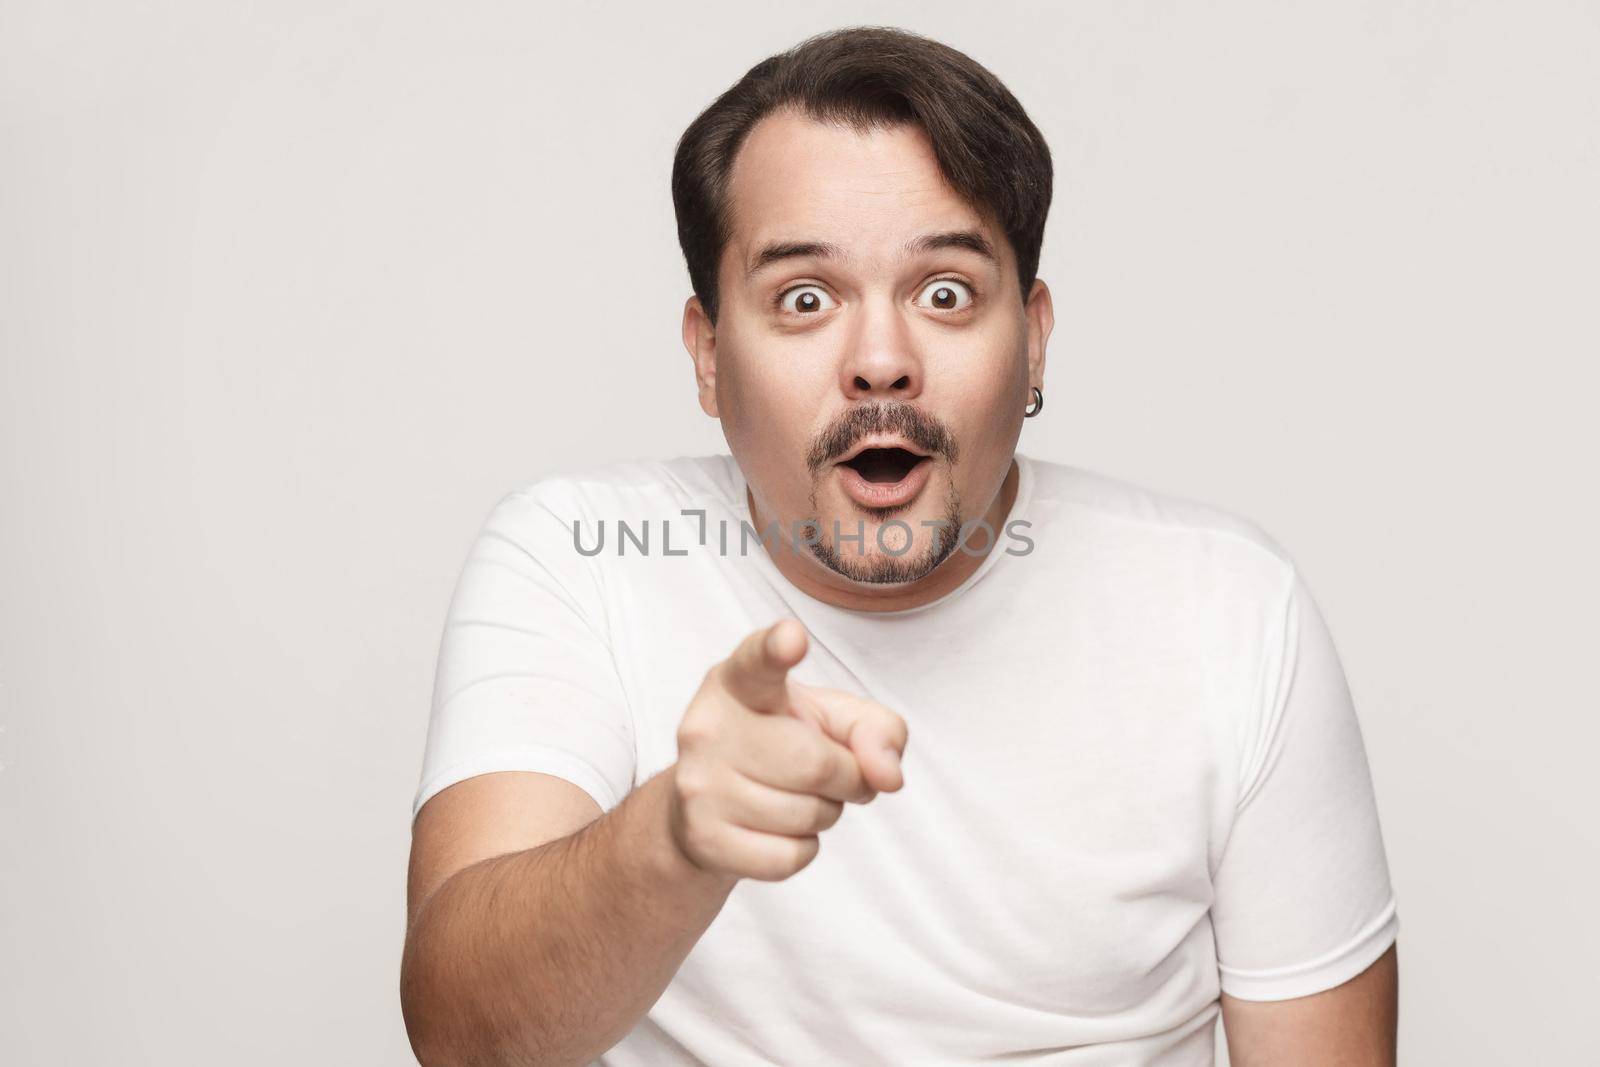 The adult man, opening mouths widely, having surprised shocked looks, pointing finger at camera. Isolated studio shot on gray background